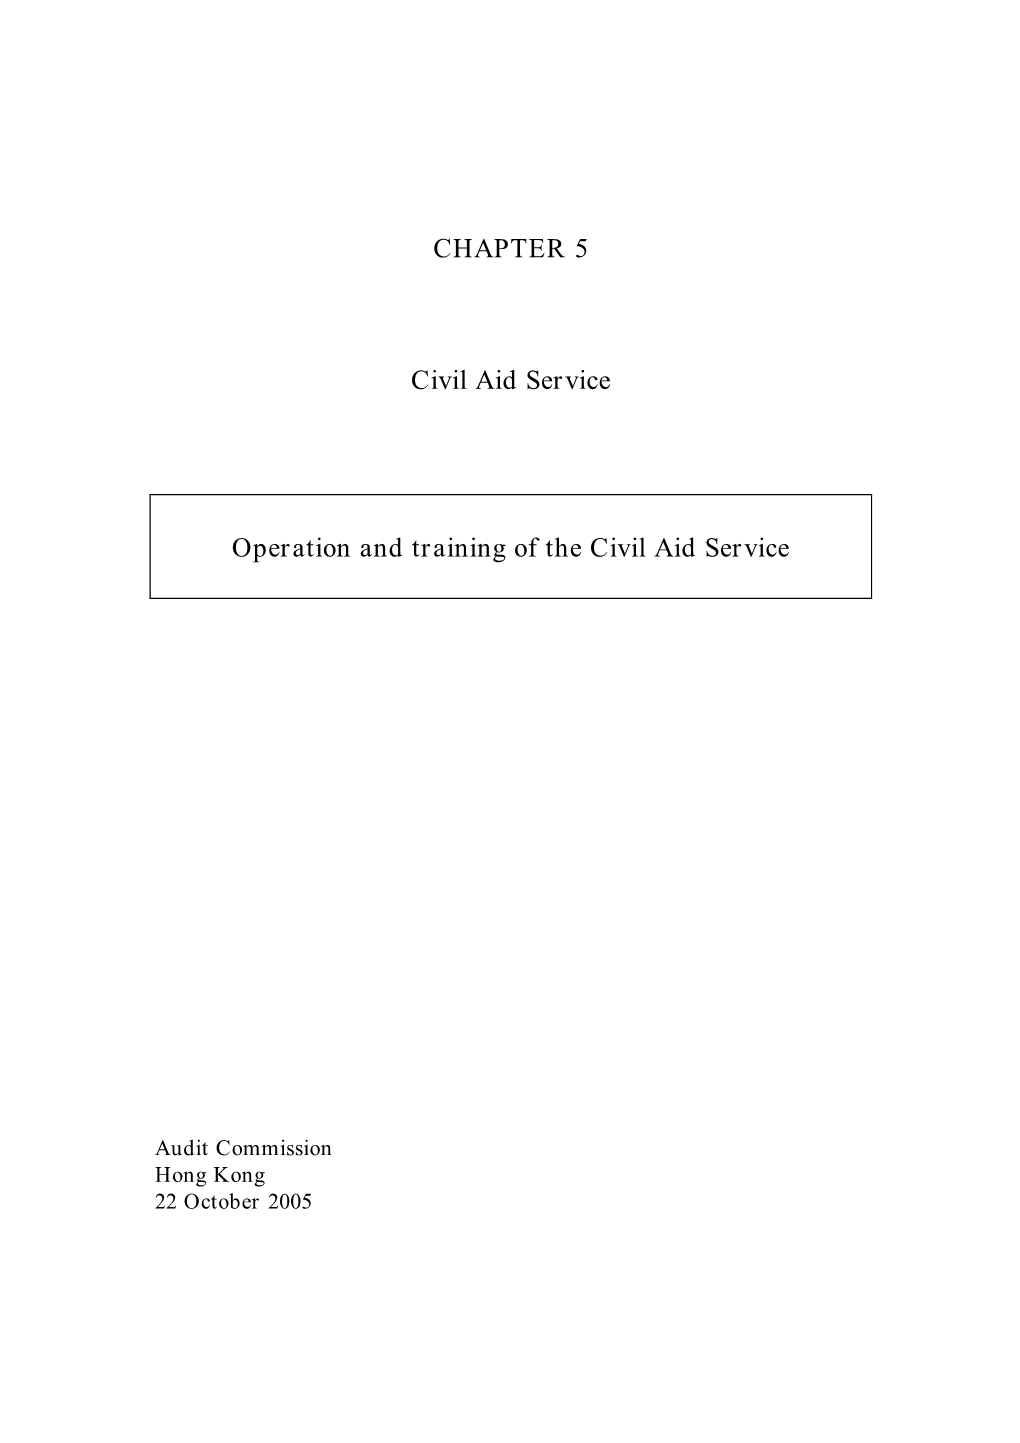 OPERATION and TRAINING of the CIVIL AID SERVICE Contents